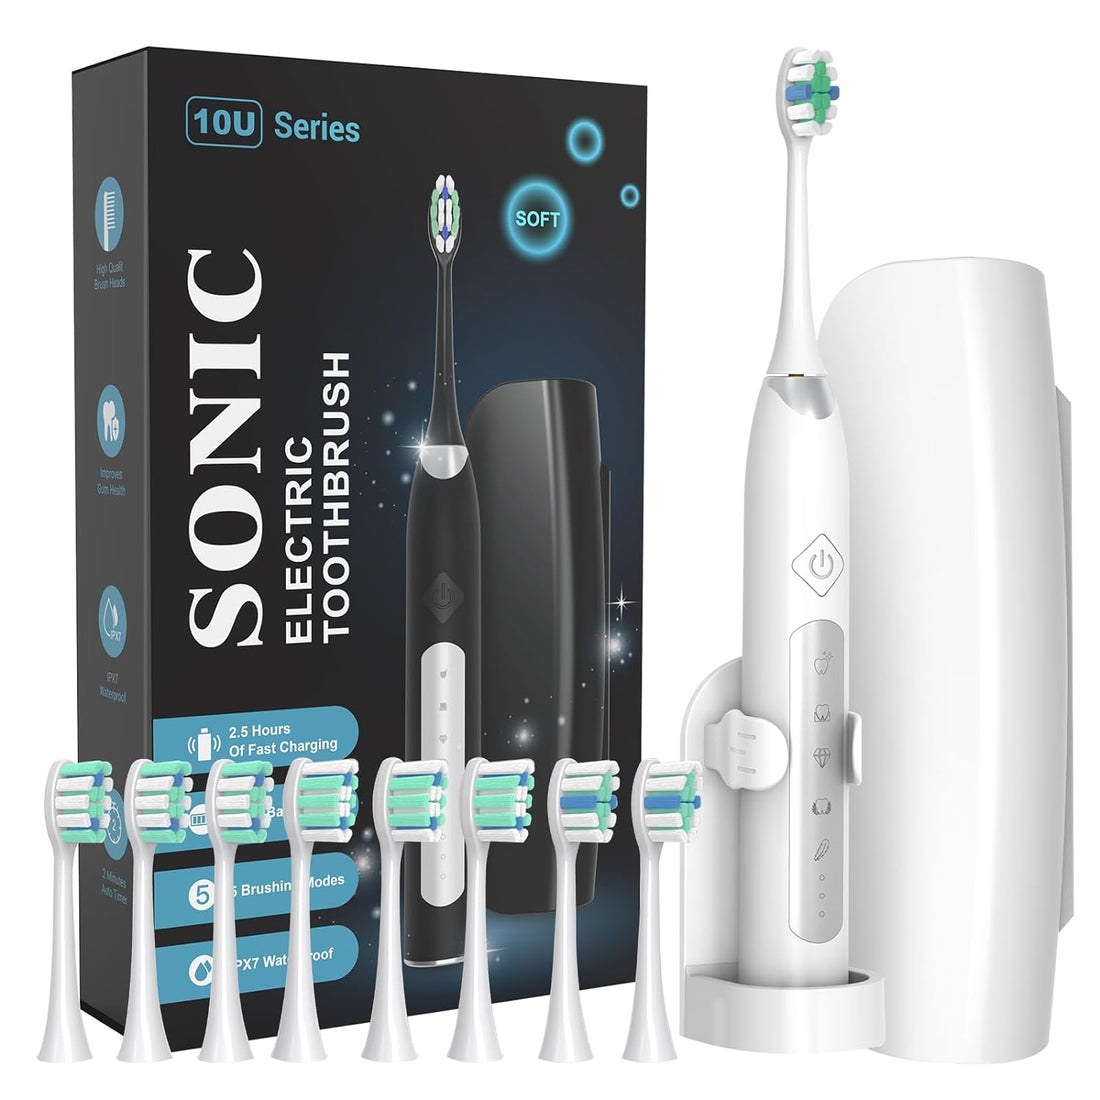 Sonic Electric Toothbrushes for Adults, 8 Brush Heads Electric Toothbrush Deep Clean 5 Modes, Rechargeable Travel Toothbrushes Fast Charge with 2 Minutes Smart Timer (White)